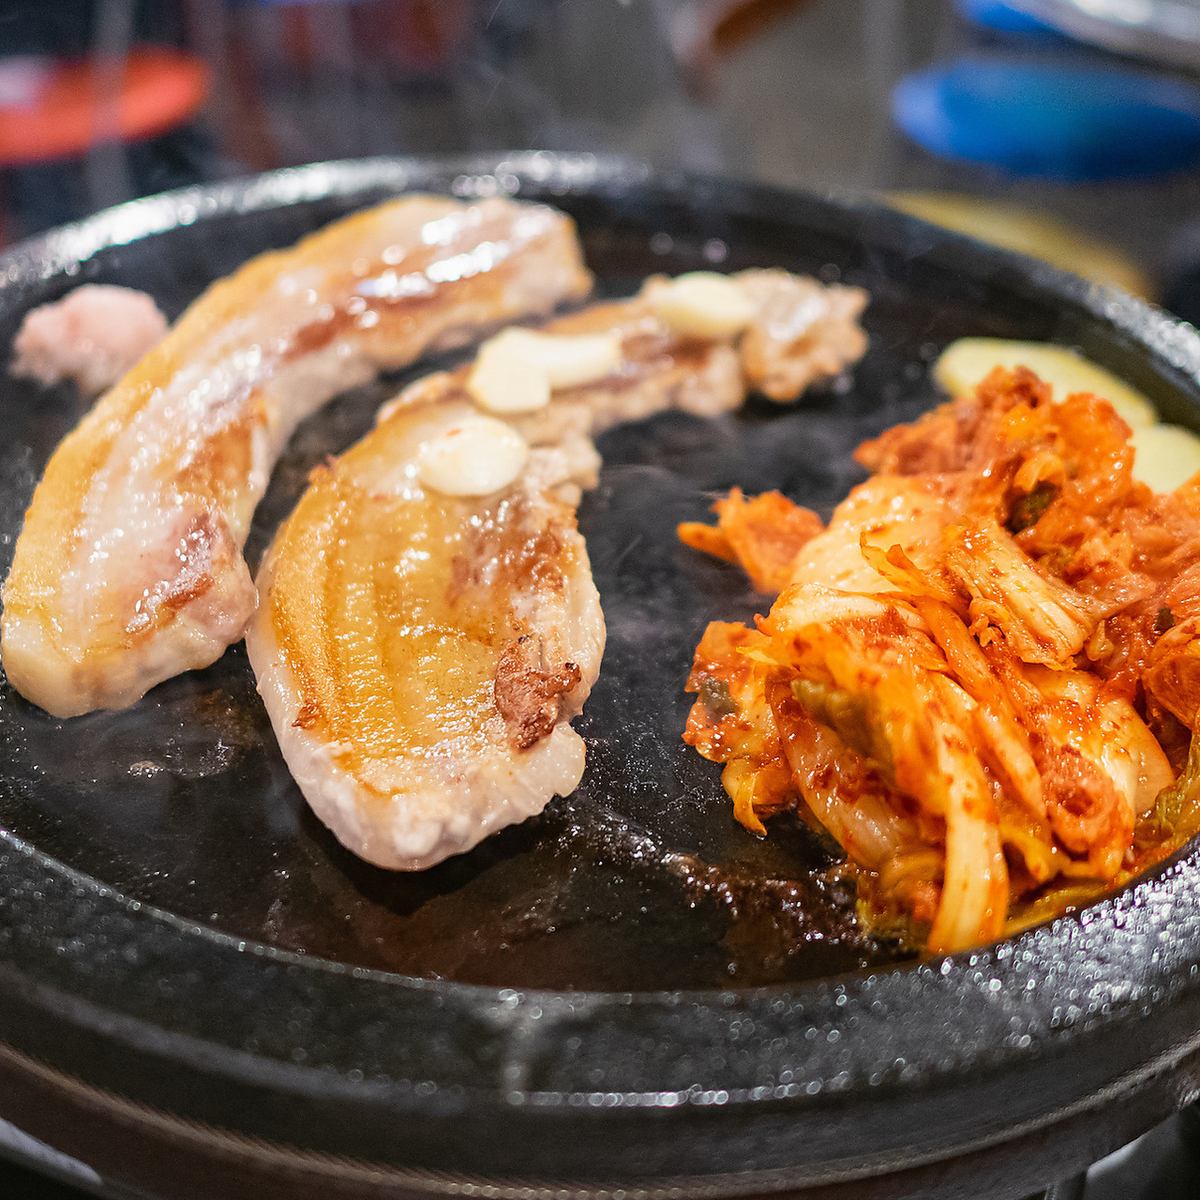 All-you-can-eat samgyeopsal for 3 hours!